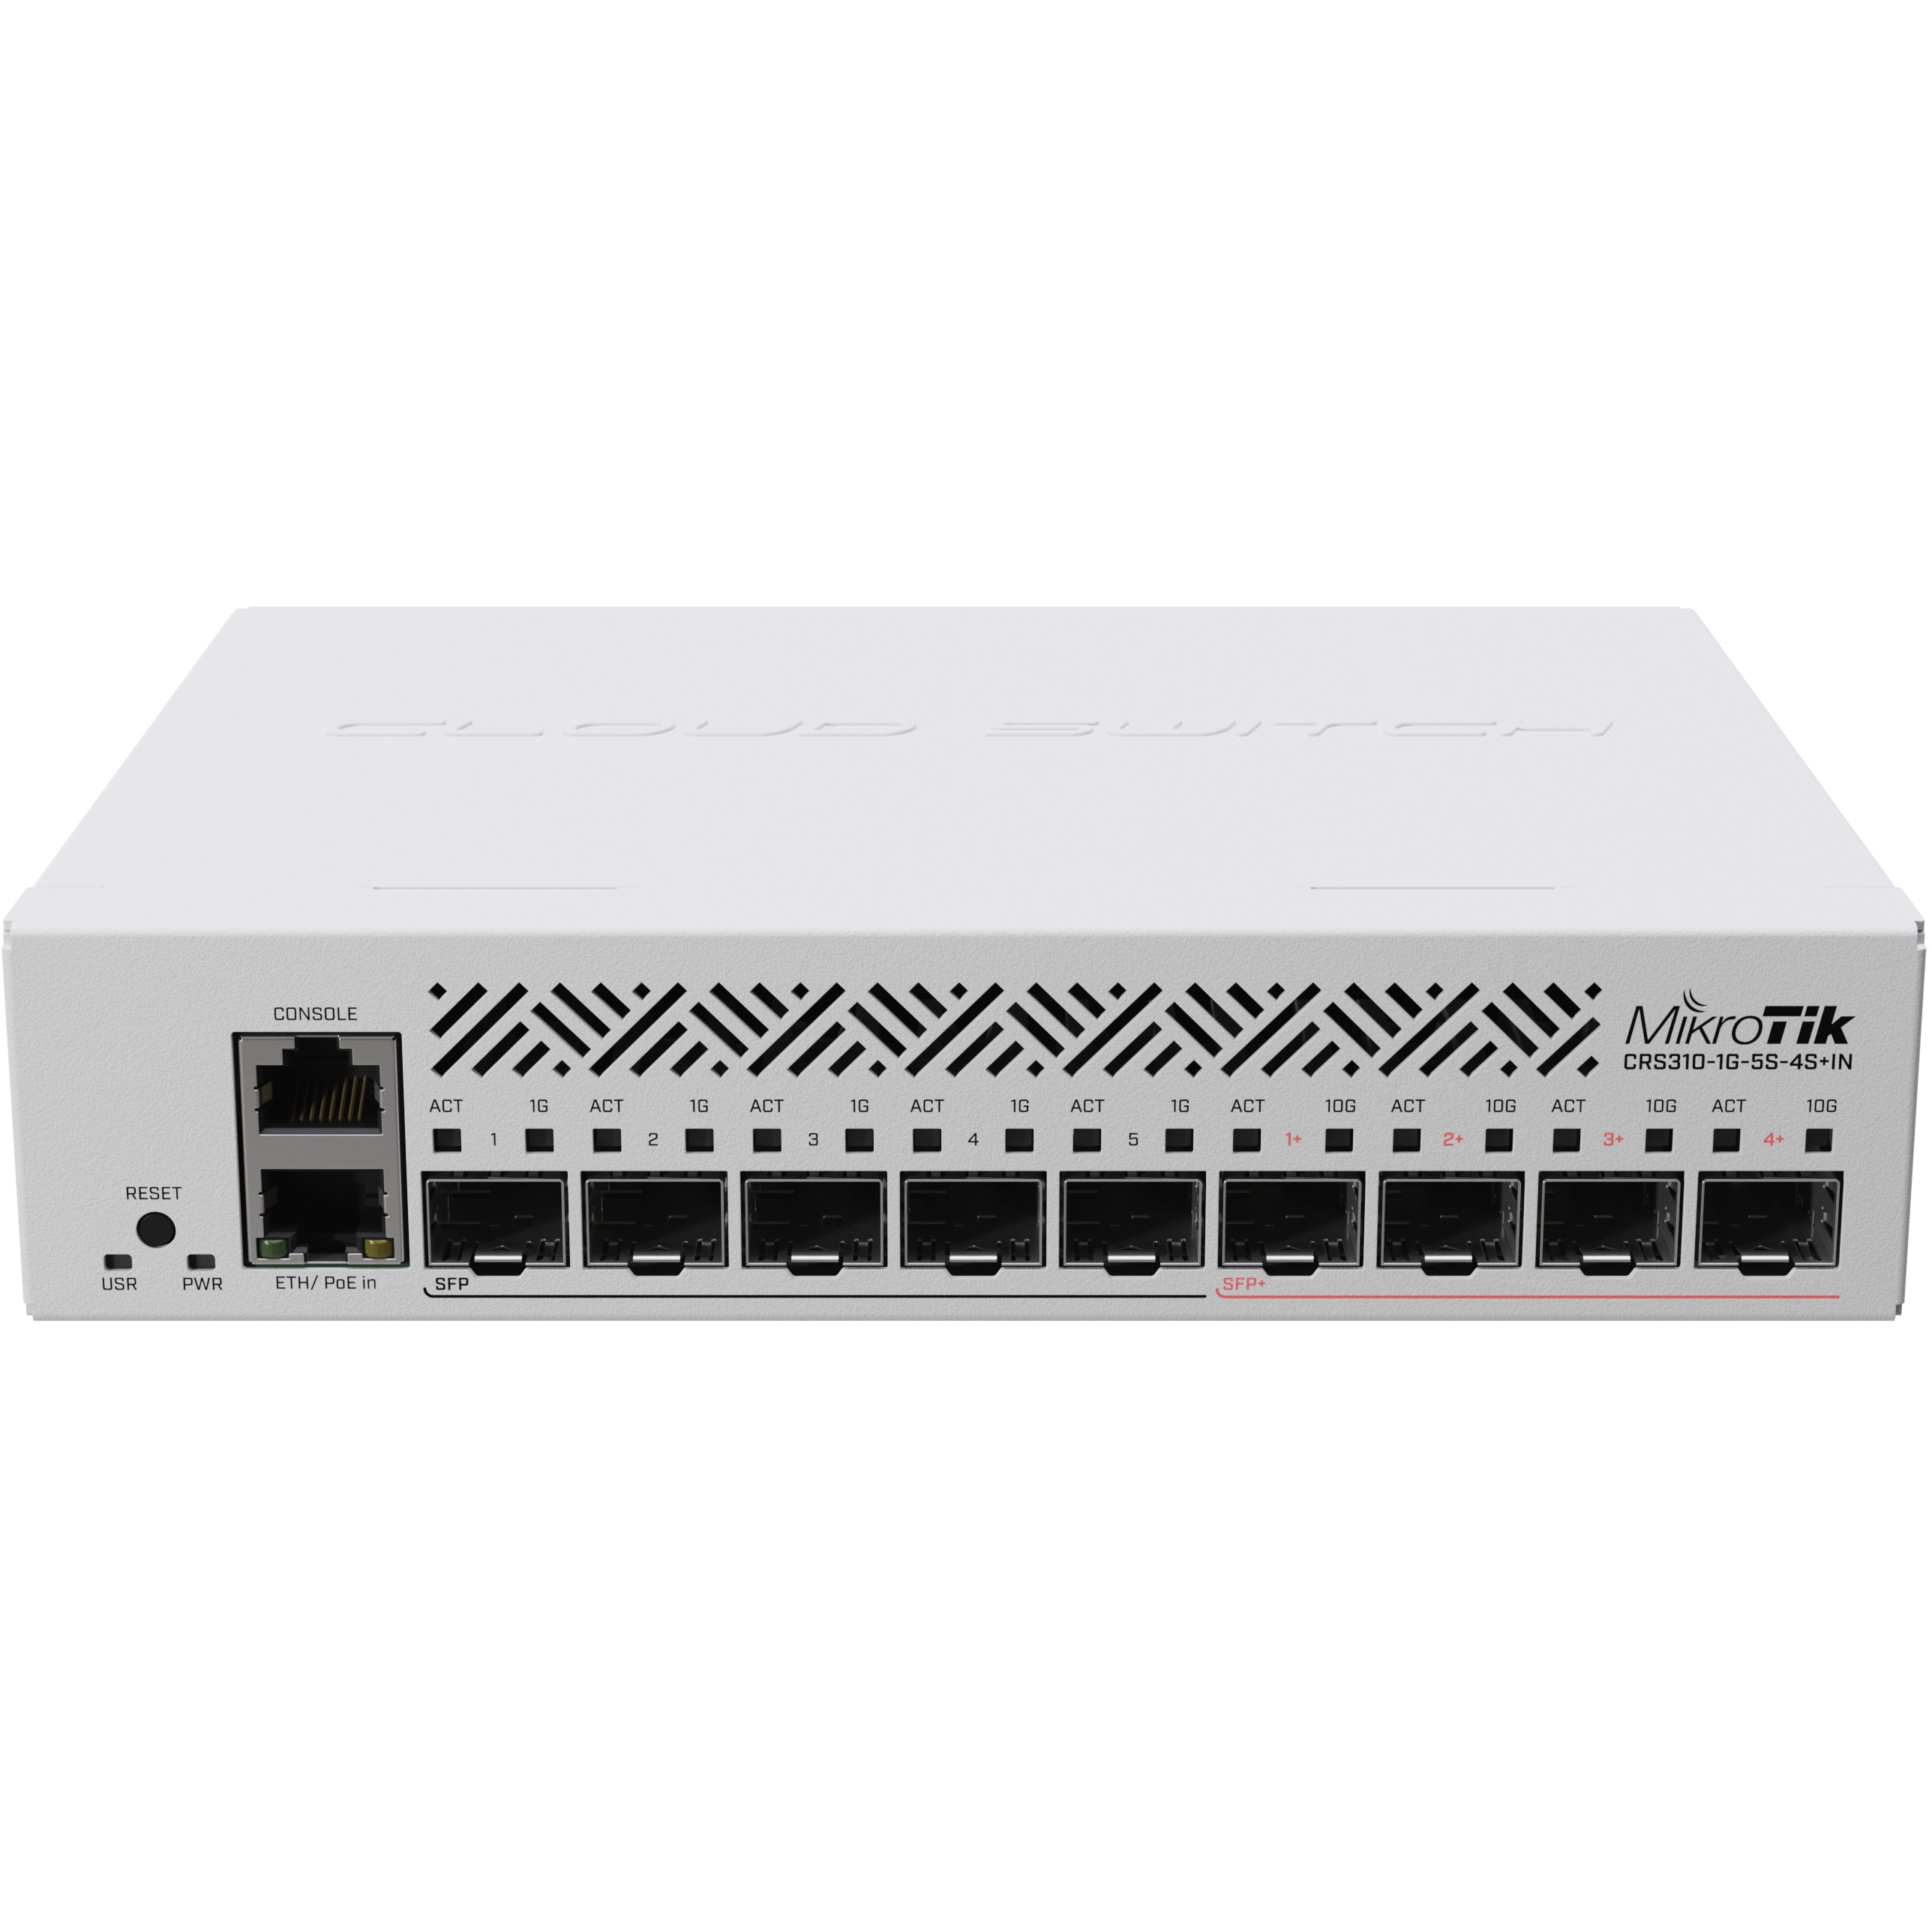 switch MIKROTIK 2 Switching Mikrotik Netzwerk CRS310-1G-5S-4S+IN Router network Hubs